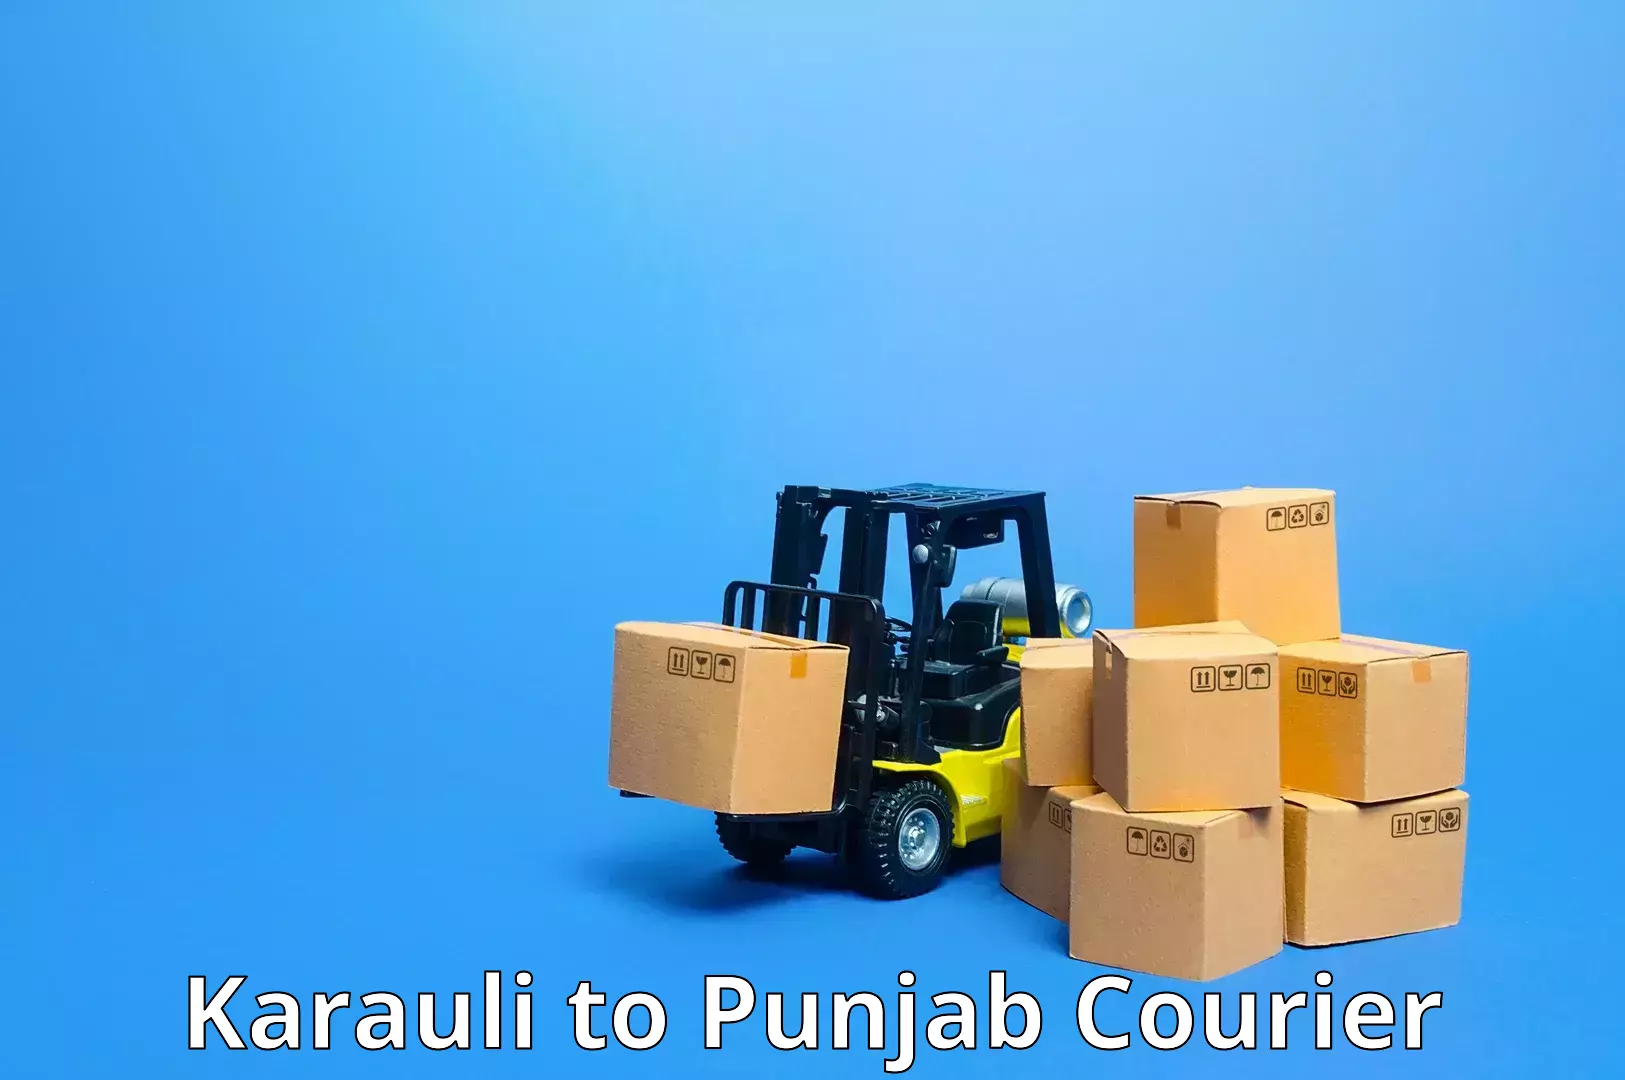 Sustainable delivery practices Karauli to Dinanagar